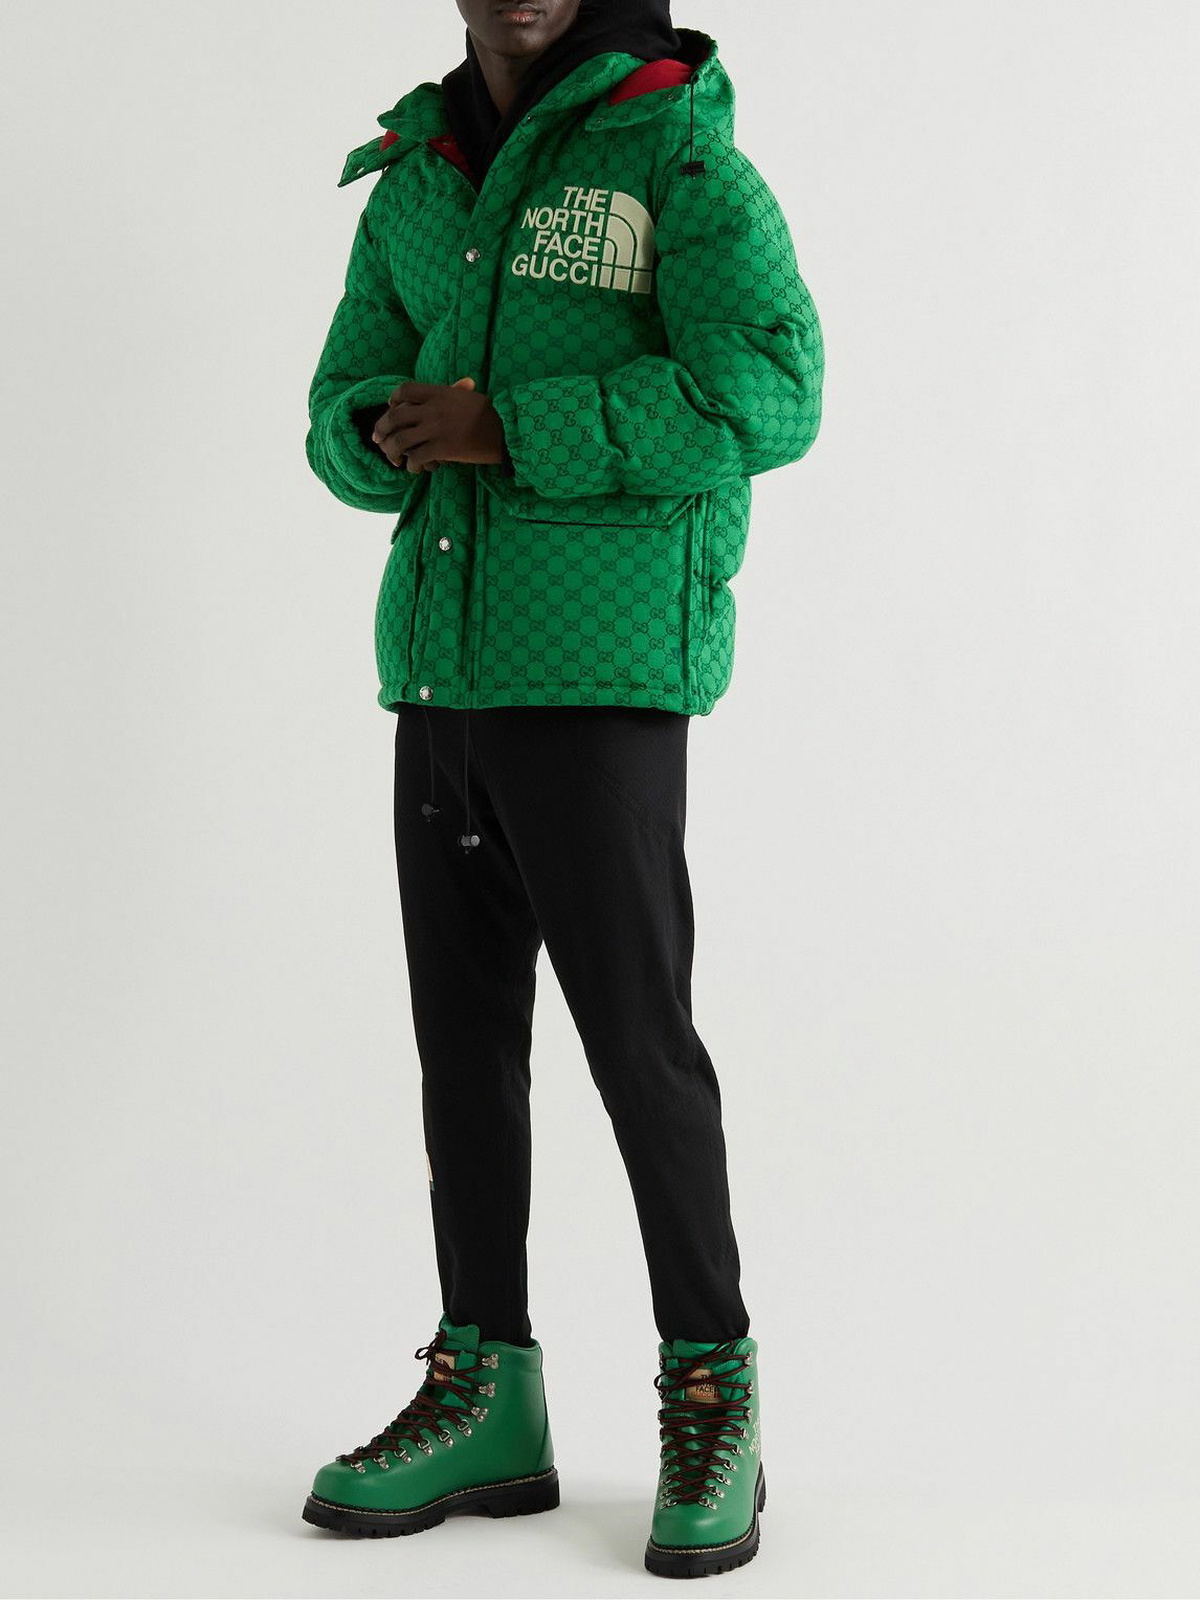 GUCCI - The North Face Logo-Print Leather Boots - Green Gucci